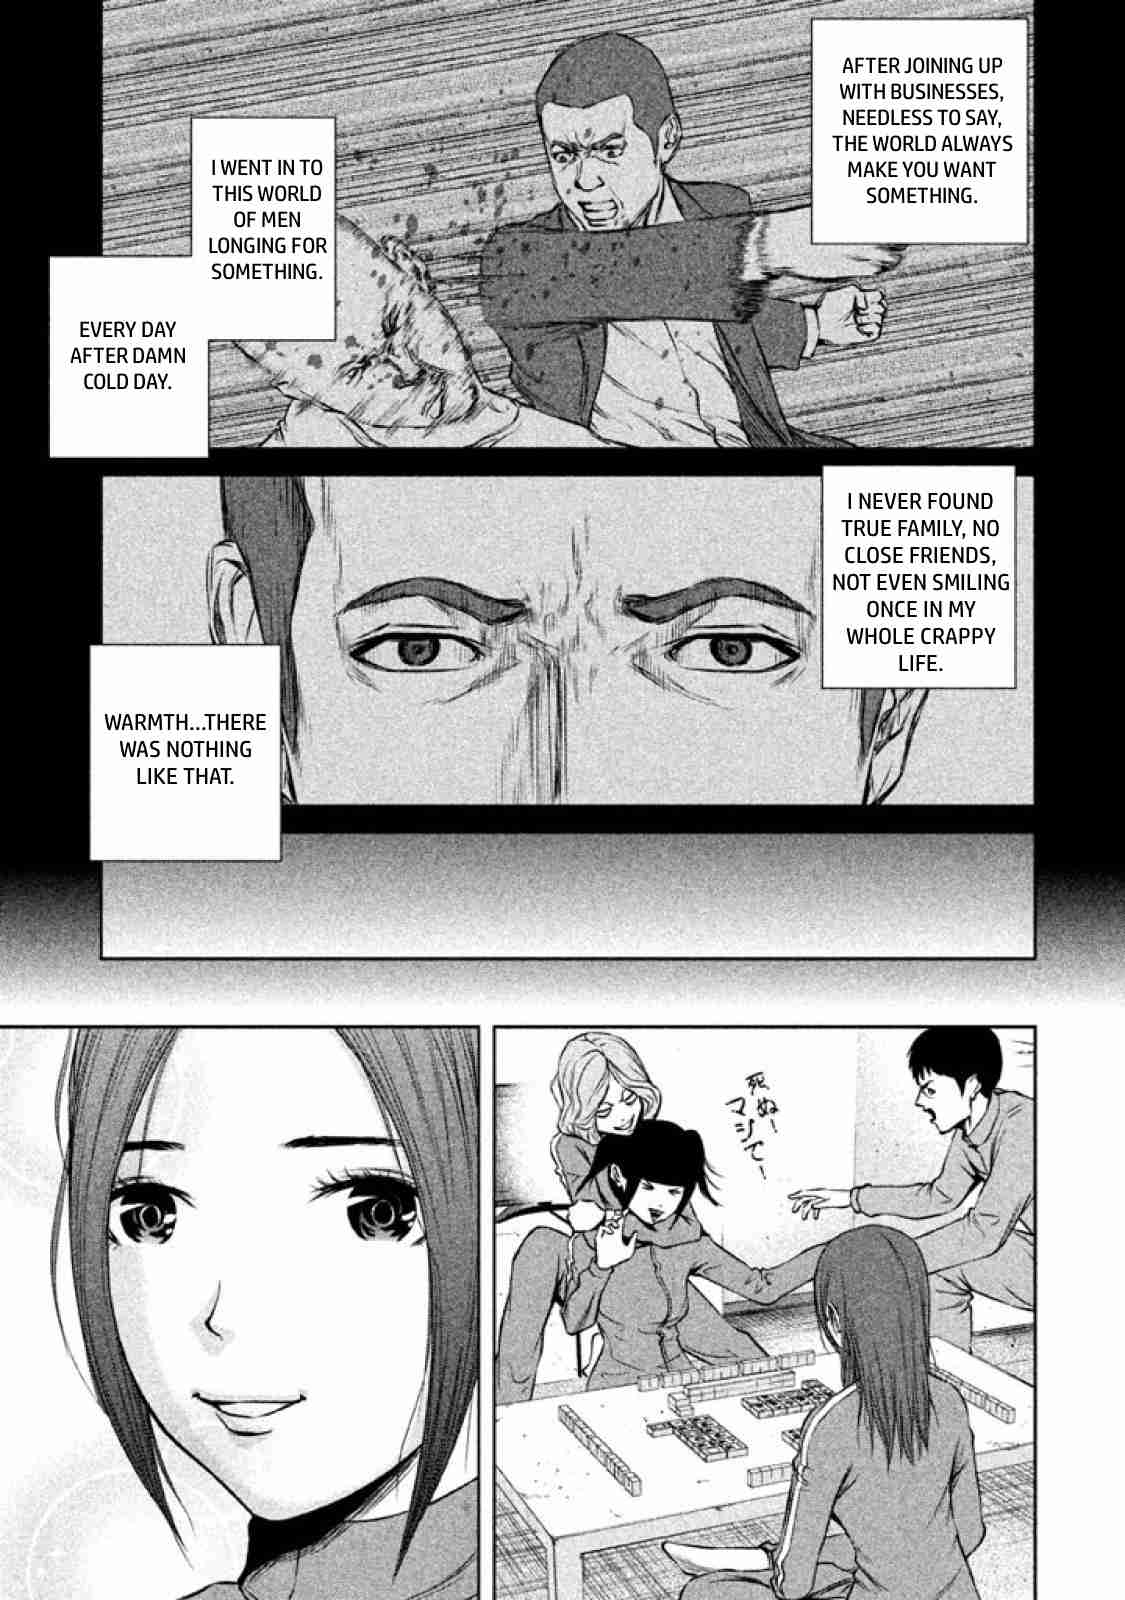 Back Street Girls Vol. 1 Ch. 10 Do you love each other?